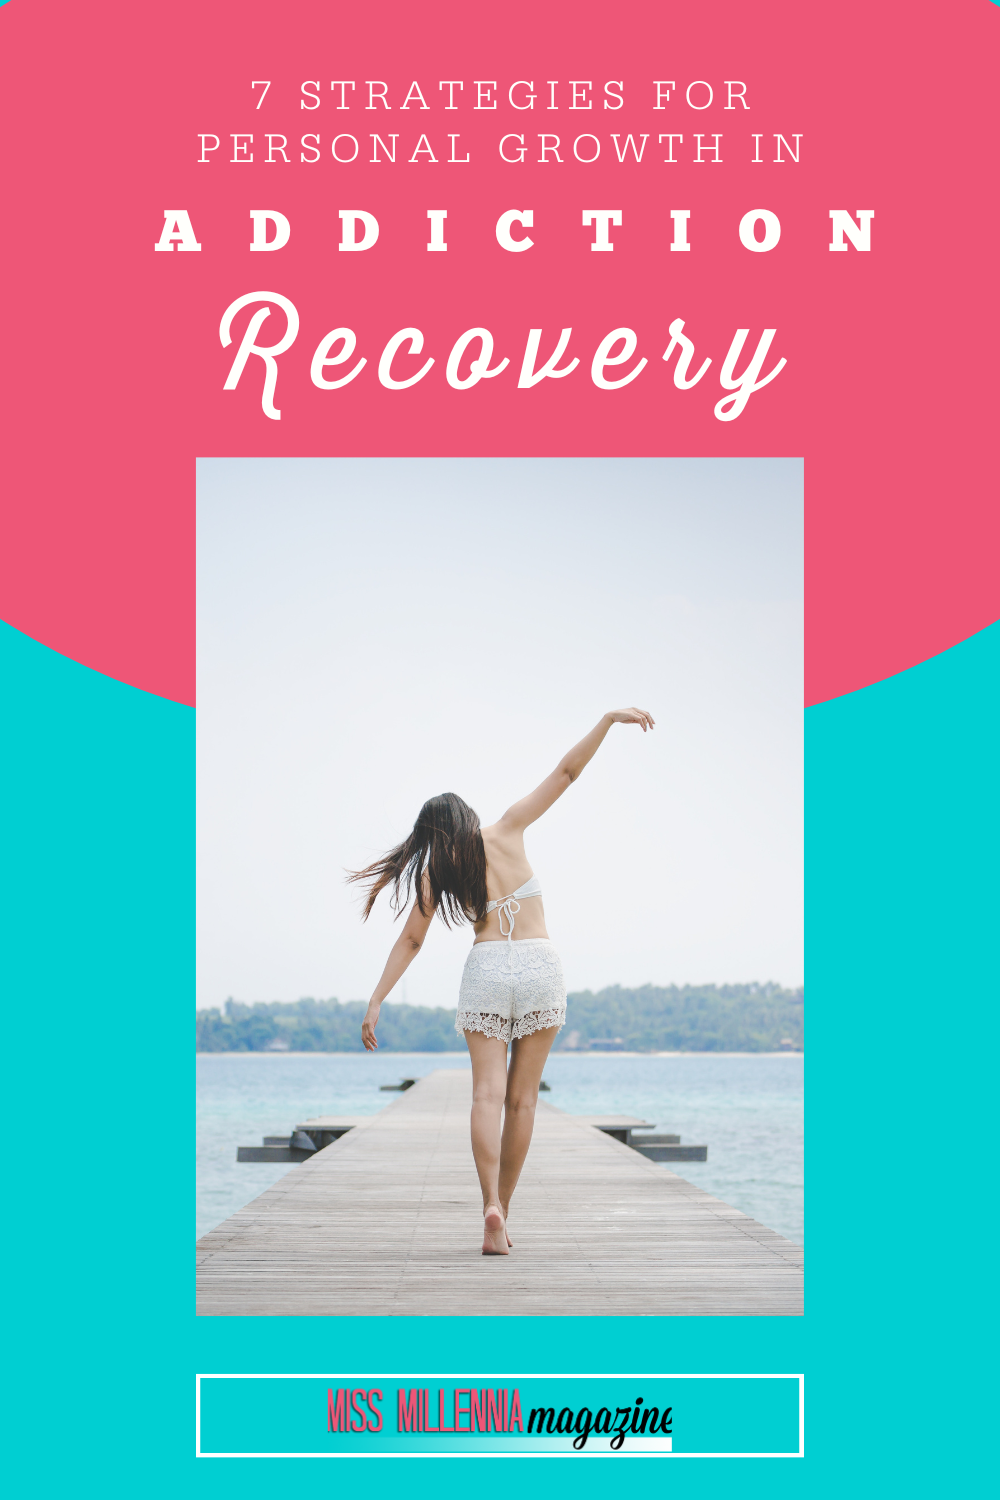 7 Strategies for Personal Growth in Addiction Recovery